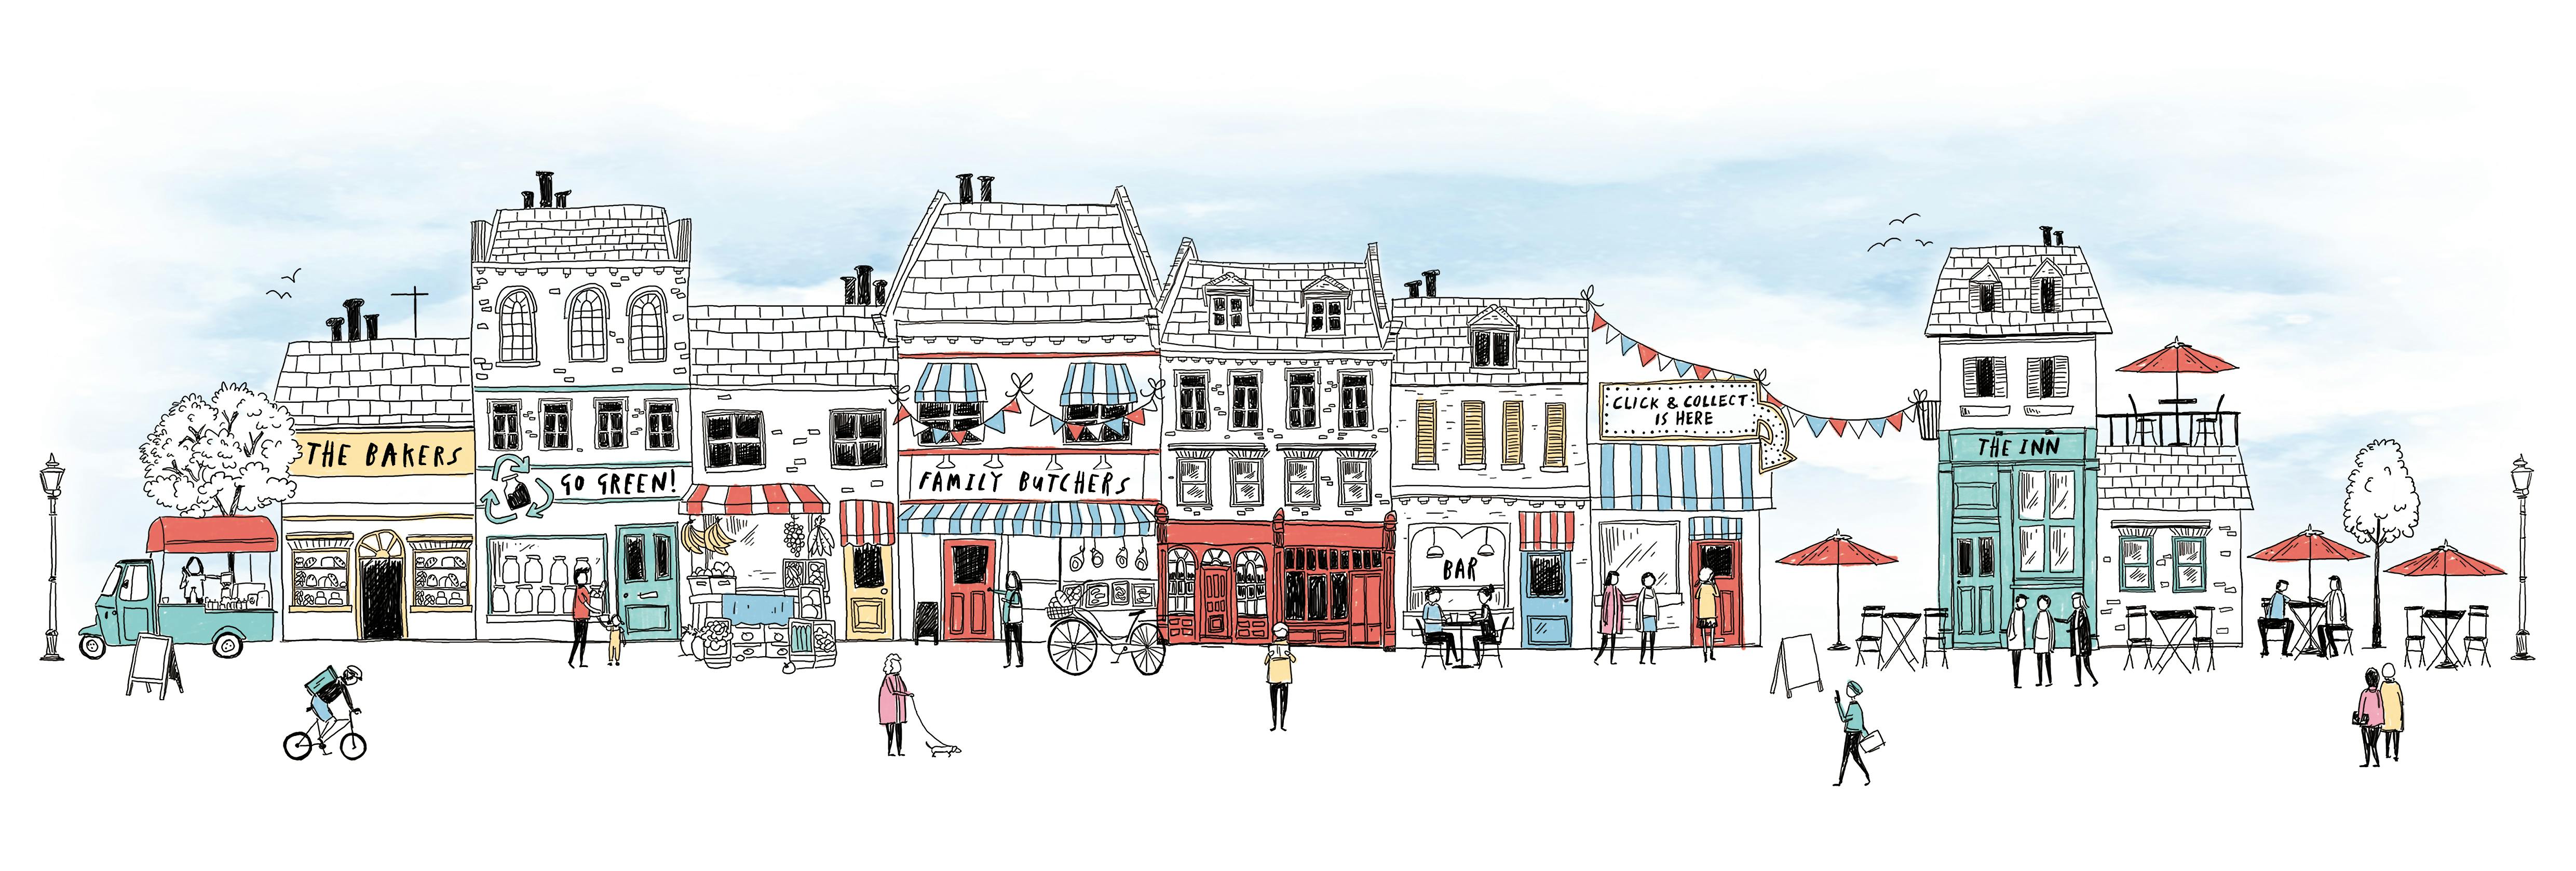 An illustration of a future high street which includes the bakers, a sustainable shop, a family butchers, a click-and-collect store, and al fresco dining.